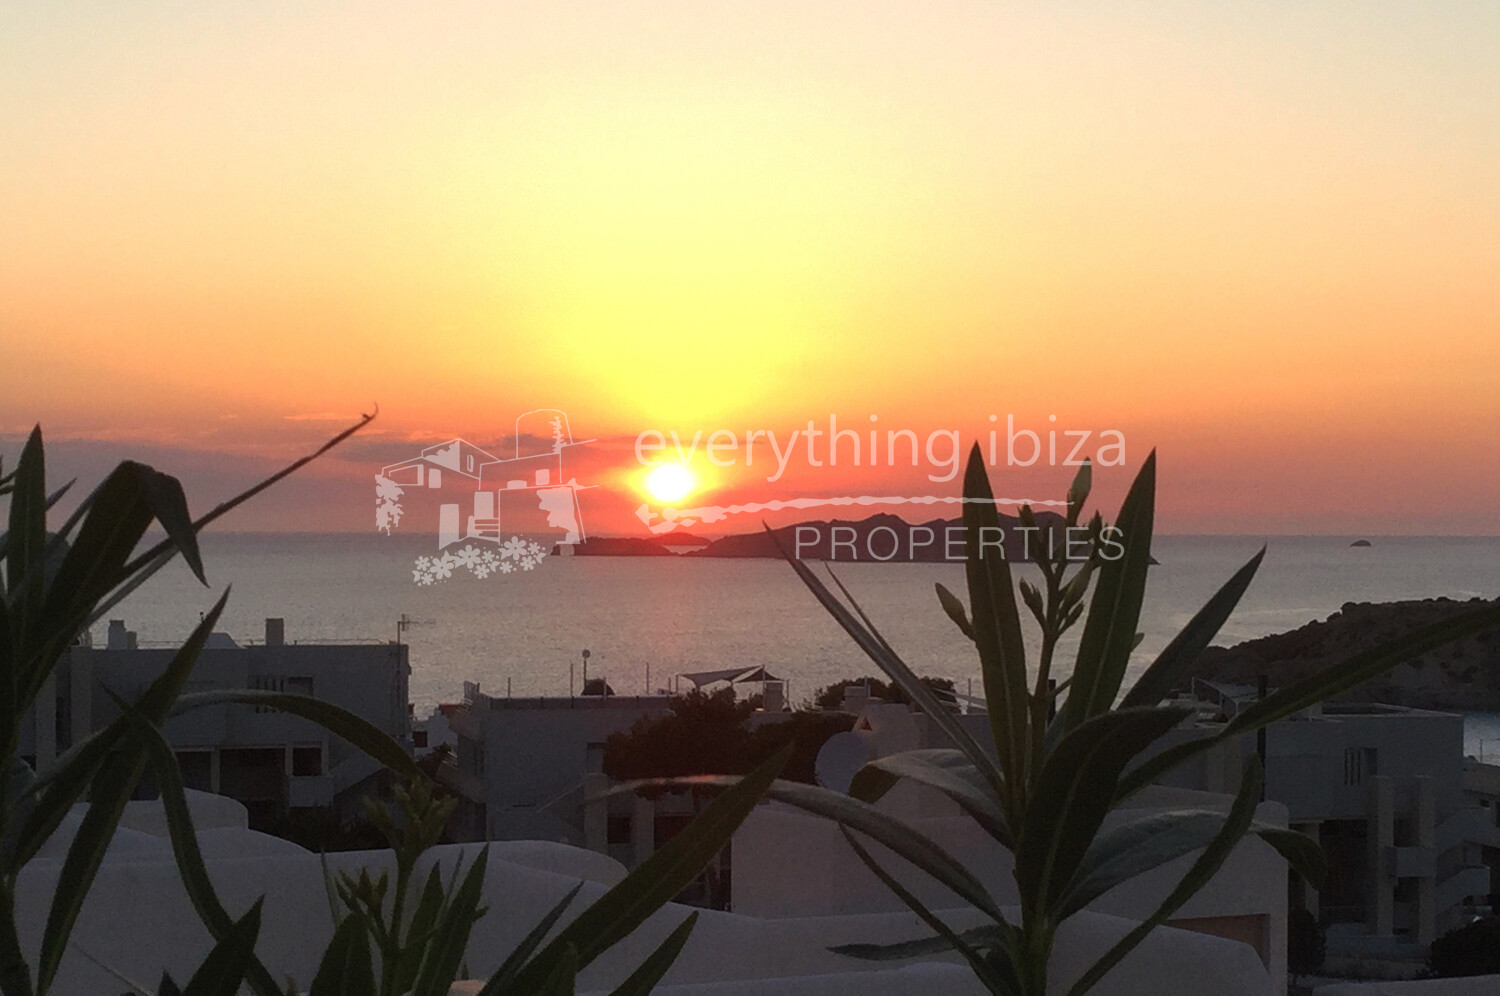 Impressive Modern Townhouse with Sea and Sunset Views, ref. 1527, for sale in Ibiza by everything ibiza Properties